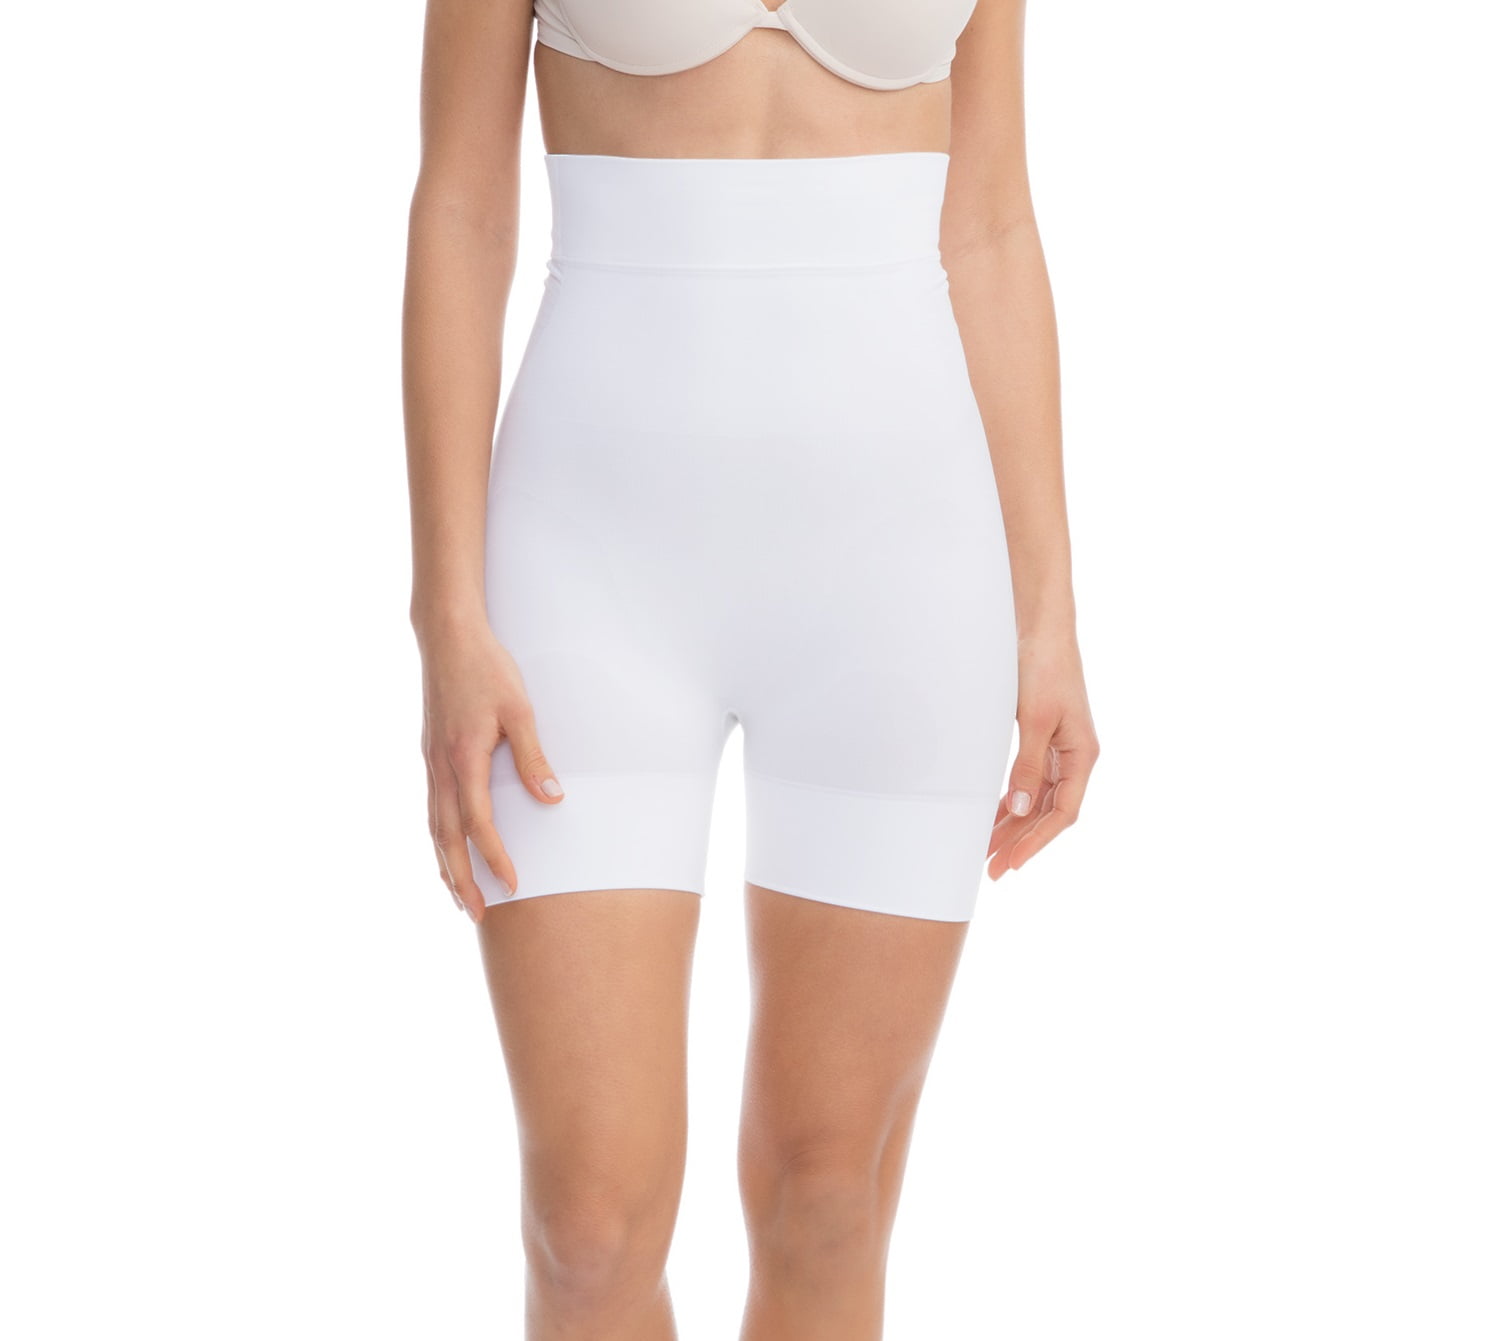 FarmaCell Shape 602 (White, M) Women's high-waisted shaping control  mid-thigh shorts with flat belly effect, 100% Made in Italy